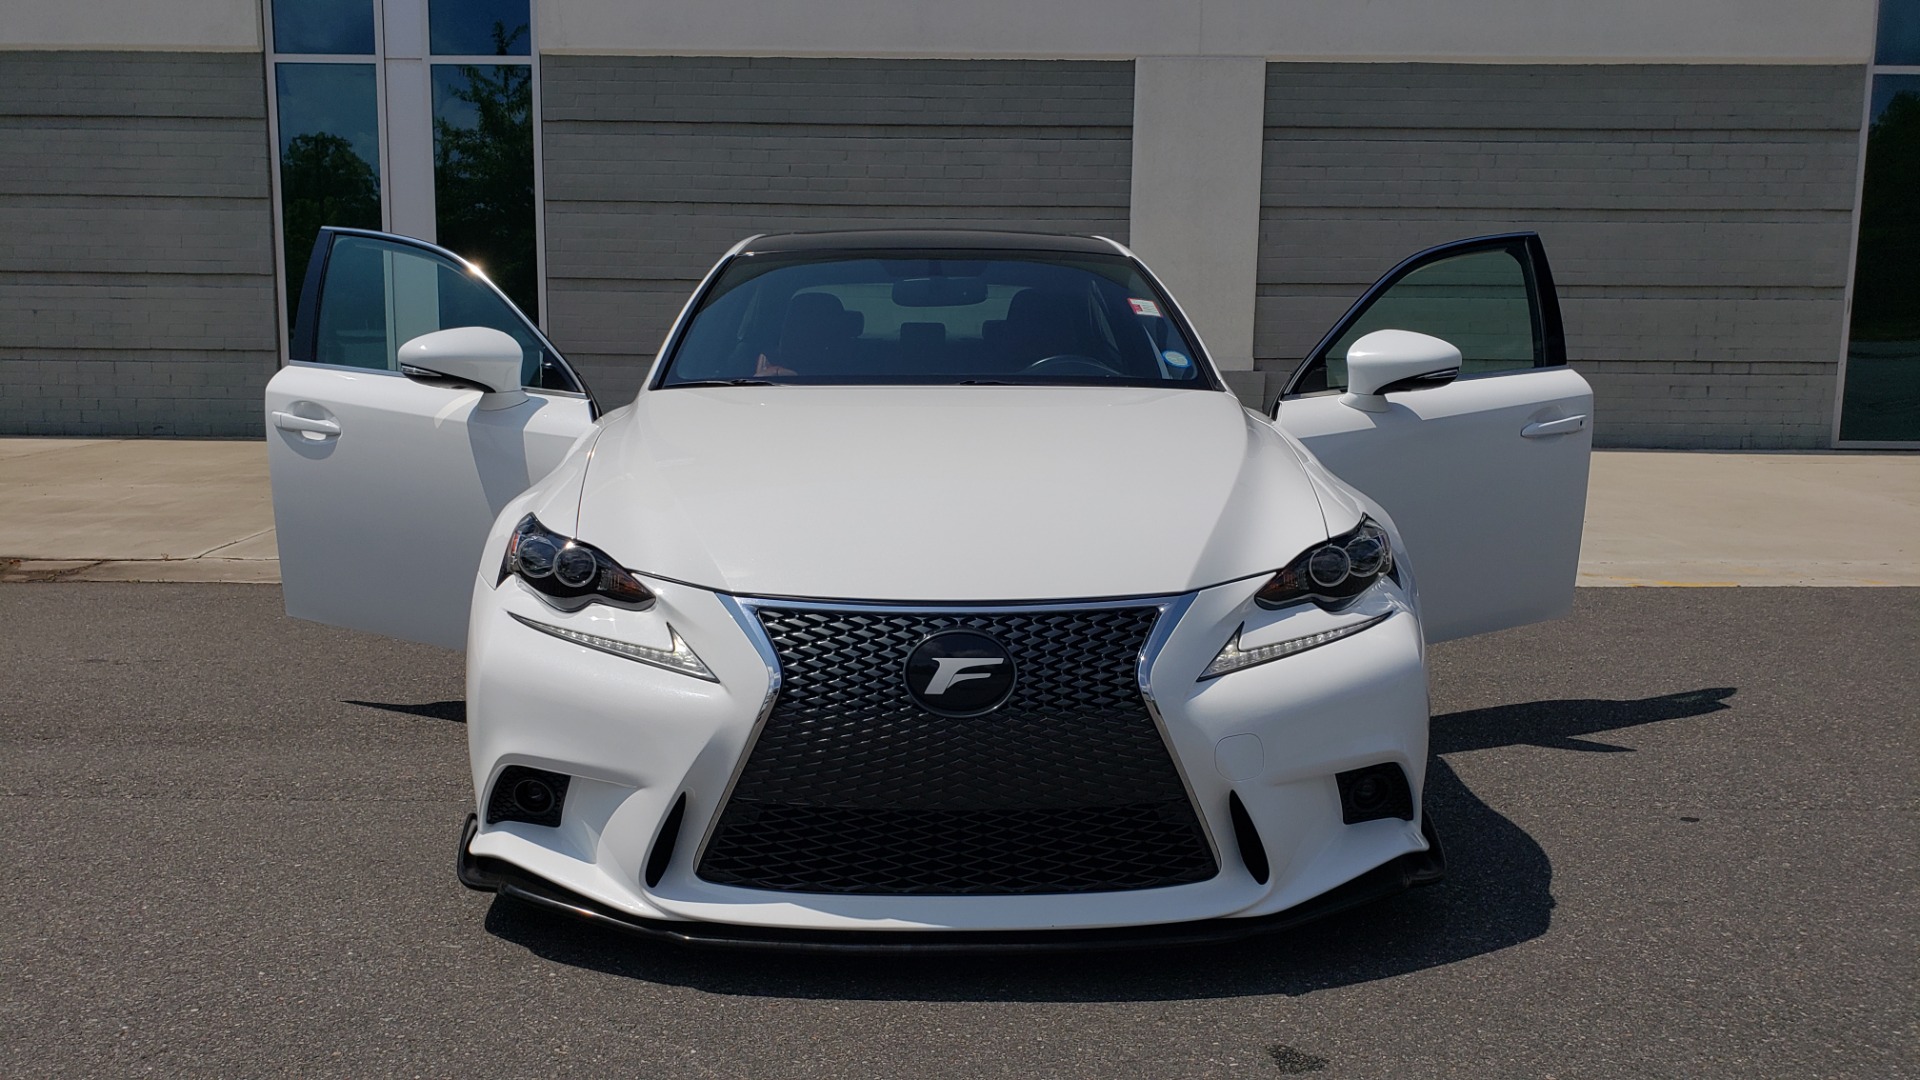 Used 2014 Lexus IS 250 F-SPORT SEDAN / BLIND SPOT MONITOR / REARVIEW / 18IN WHEELS for sale Sold at Formula Imports in Charlotte NC 28227 20